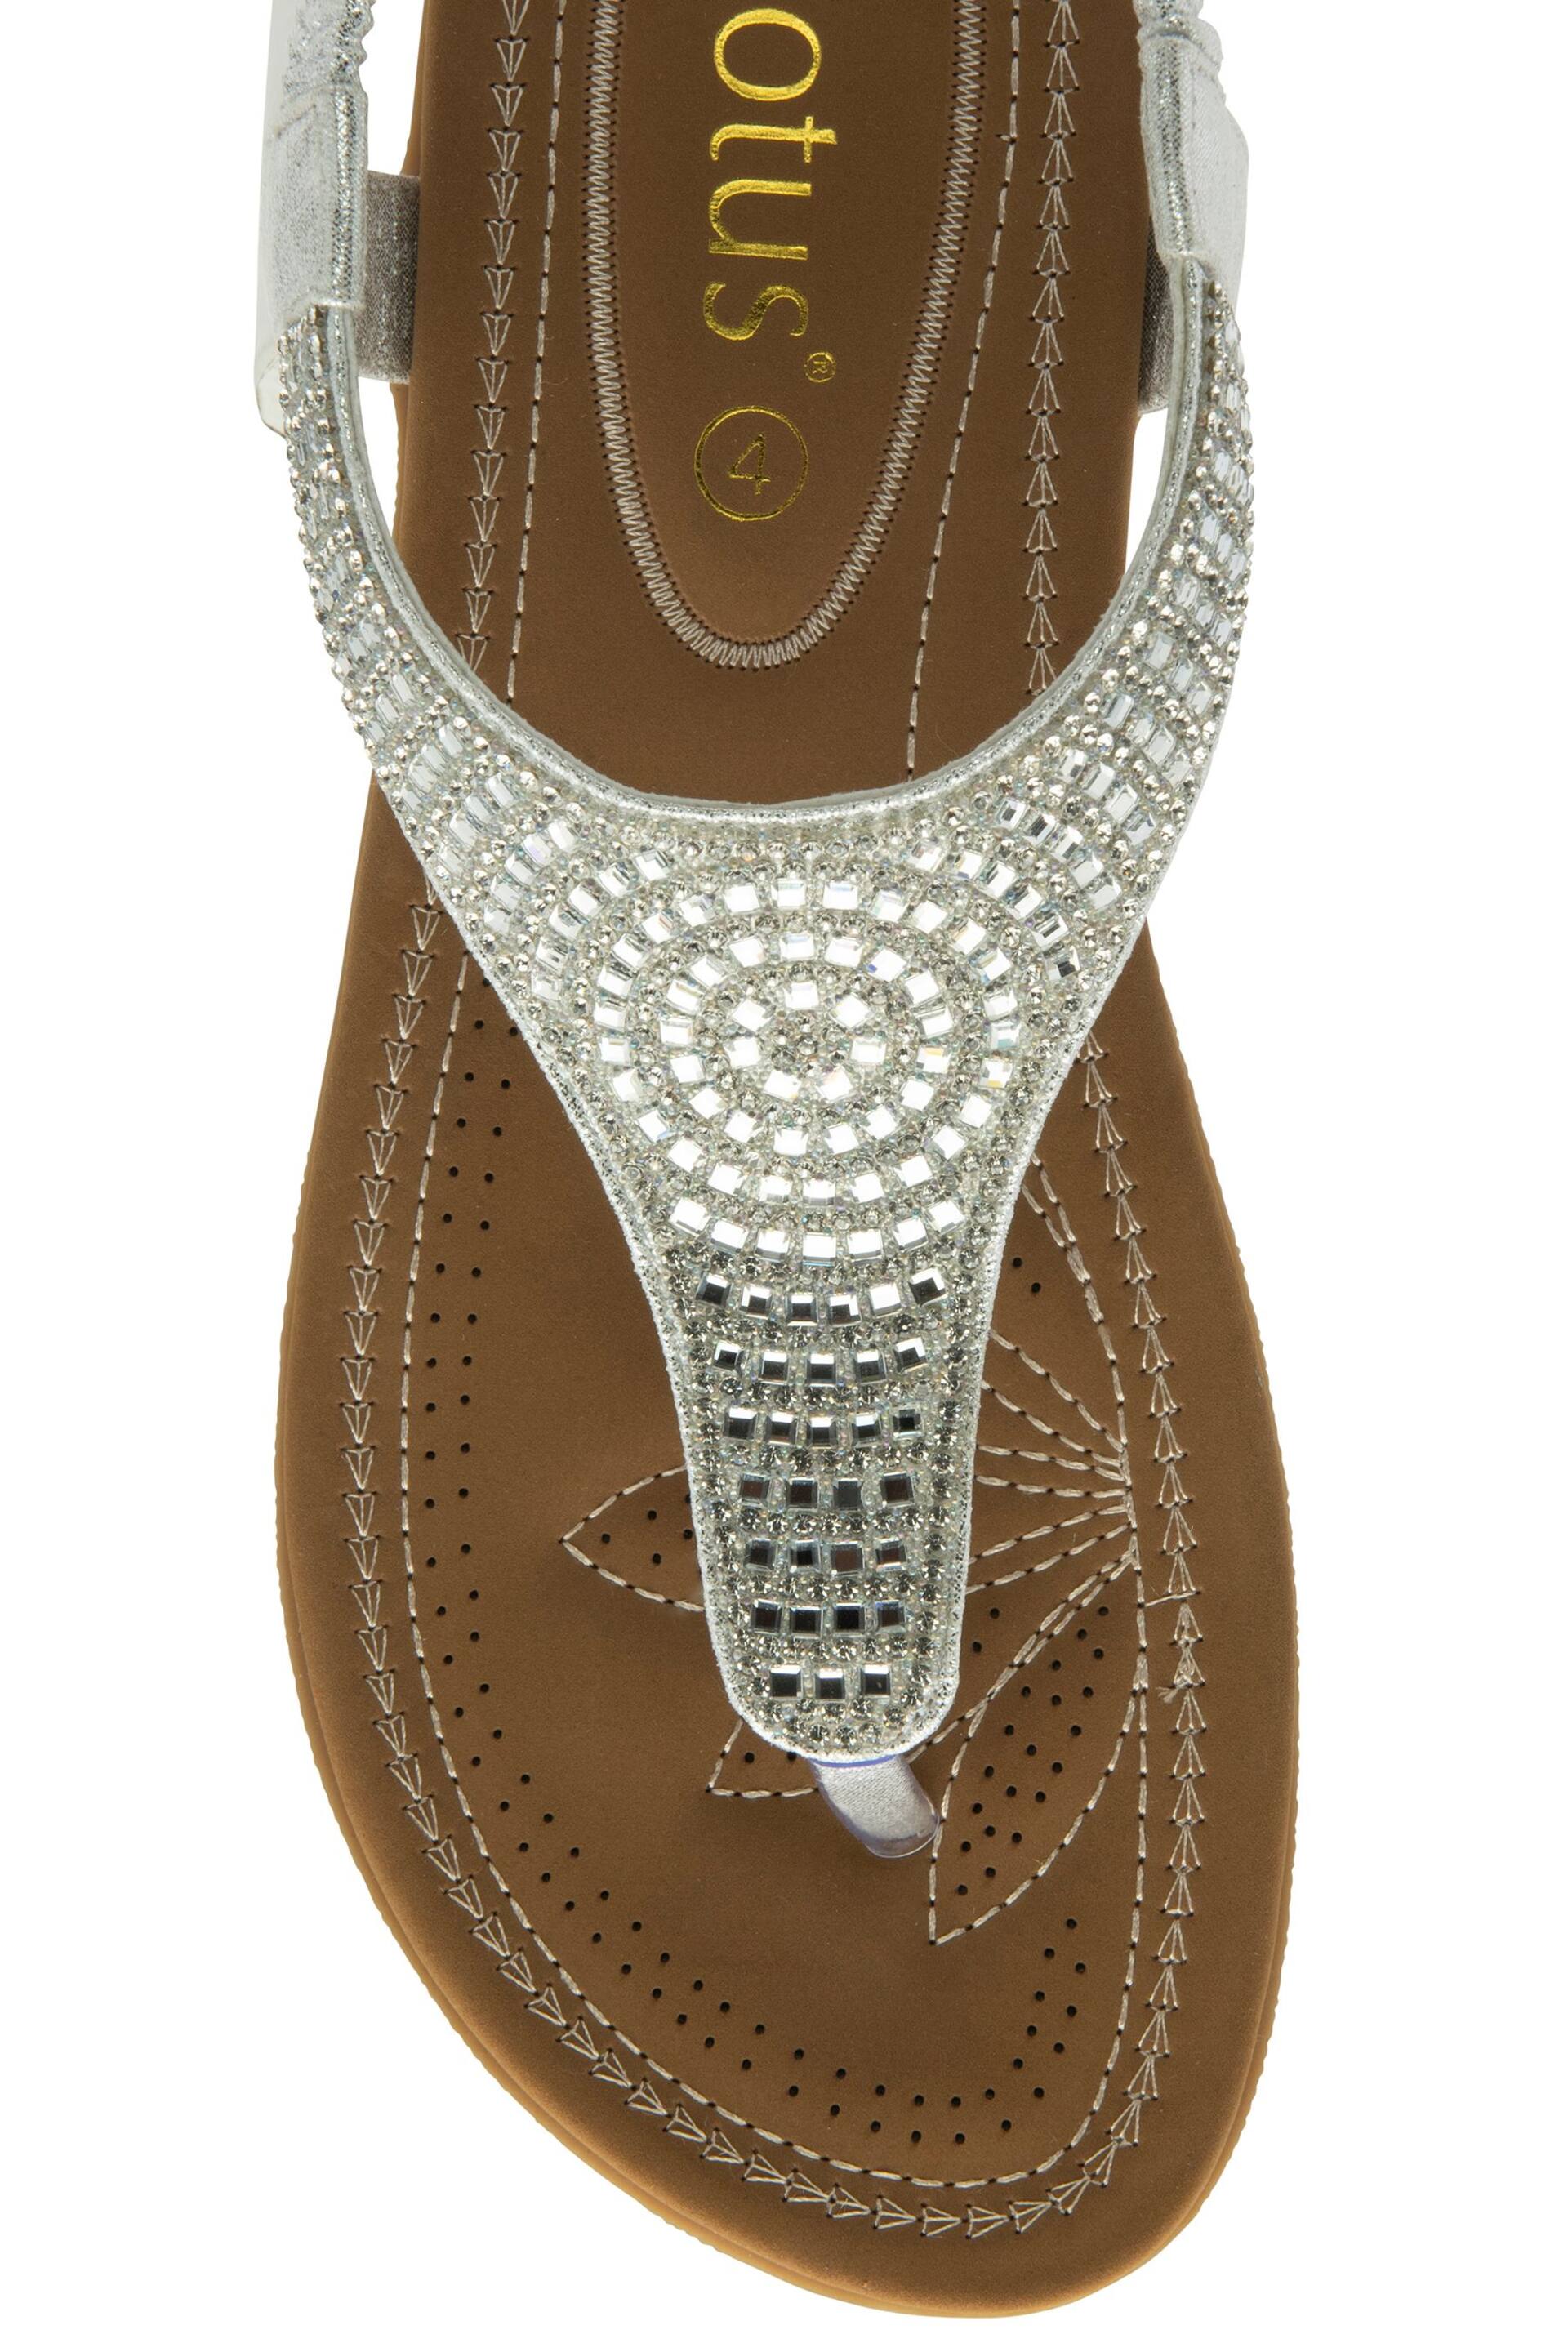 Lotus Silver Casual Toe Thong Holiday Sandals - Image 4 of 4